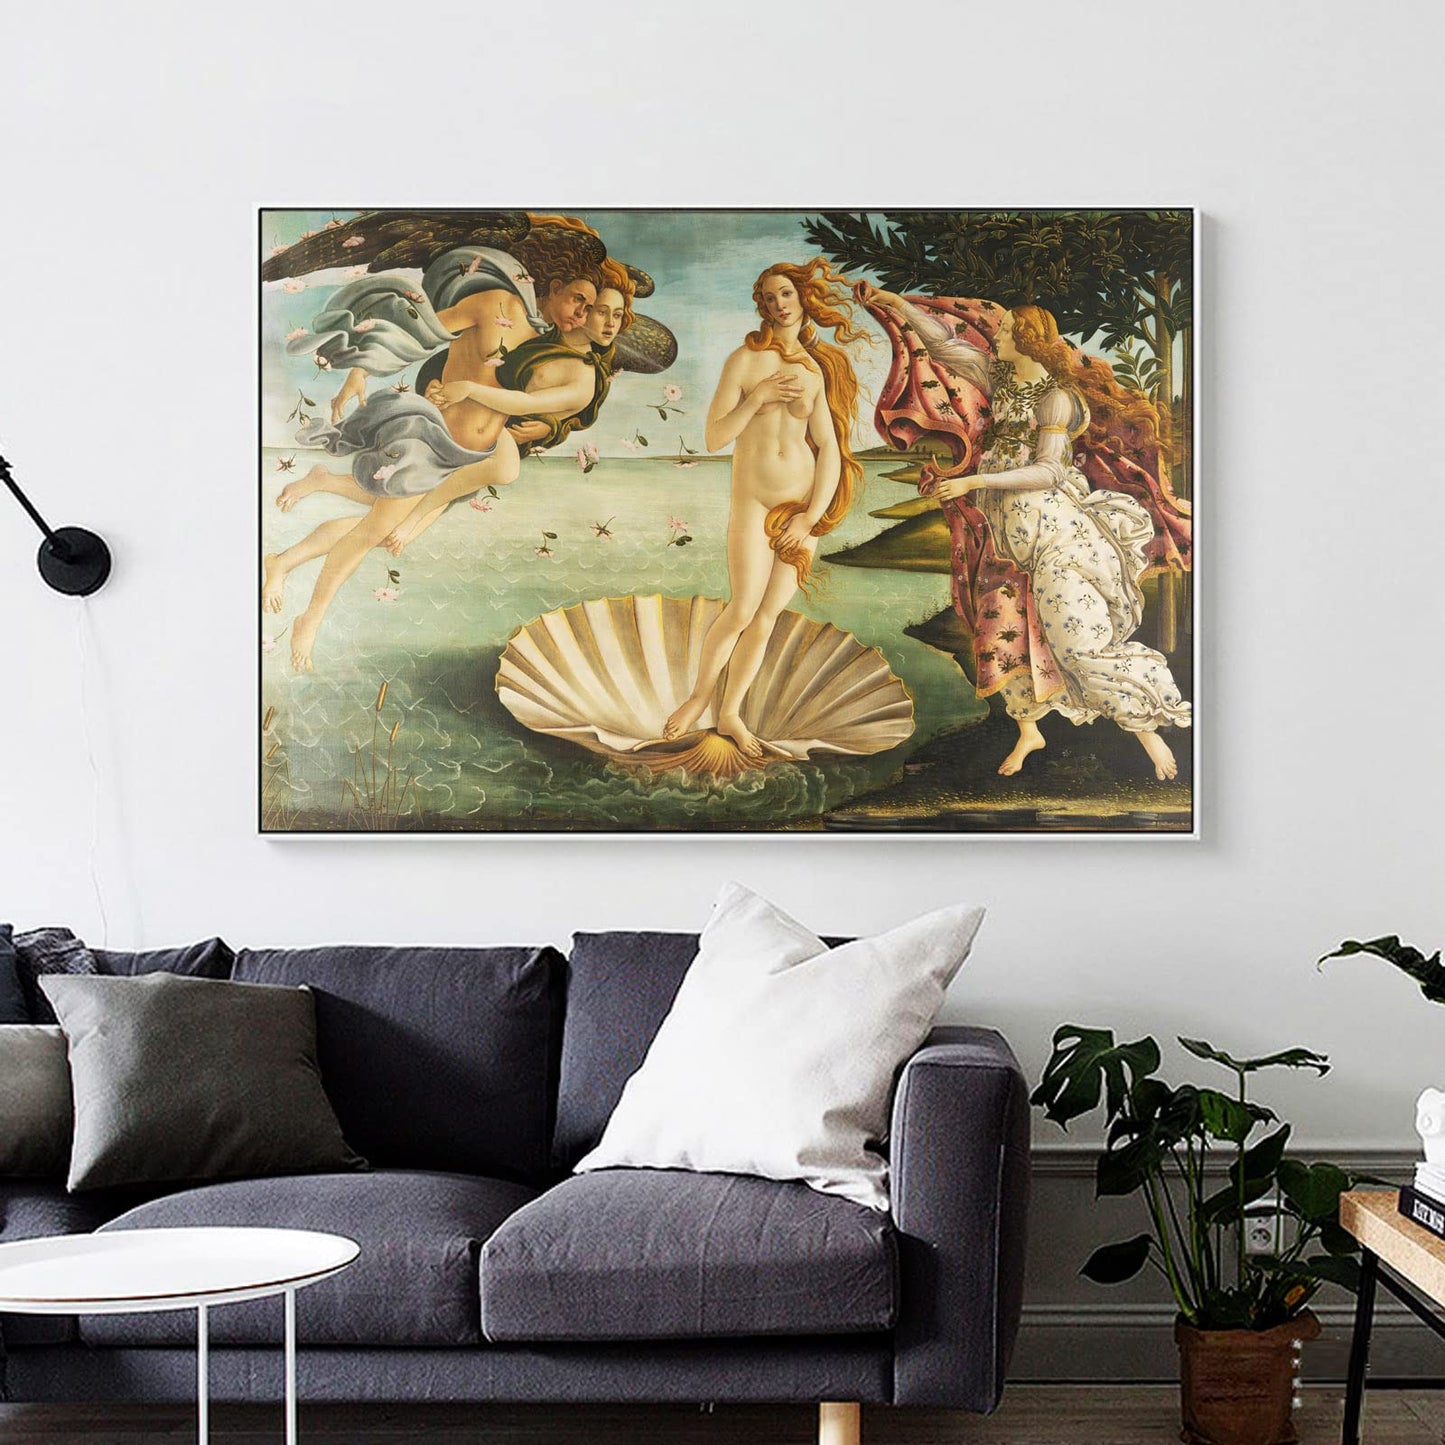 ZZPT Sandro Botticelli Wall Art Print - The Birth of Venus Poster - Abstract Painting Modern Canvas Art Wall Decor for Living Room Bedroom Home Decor Unframed (12x18in/30x45cm)